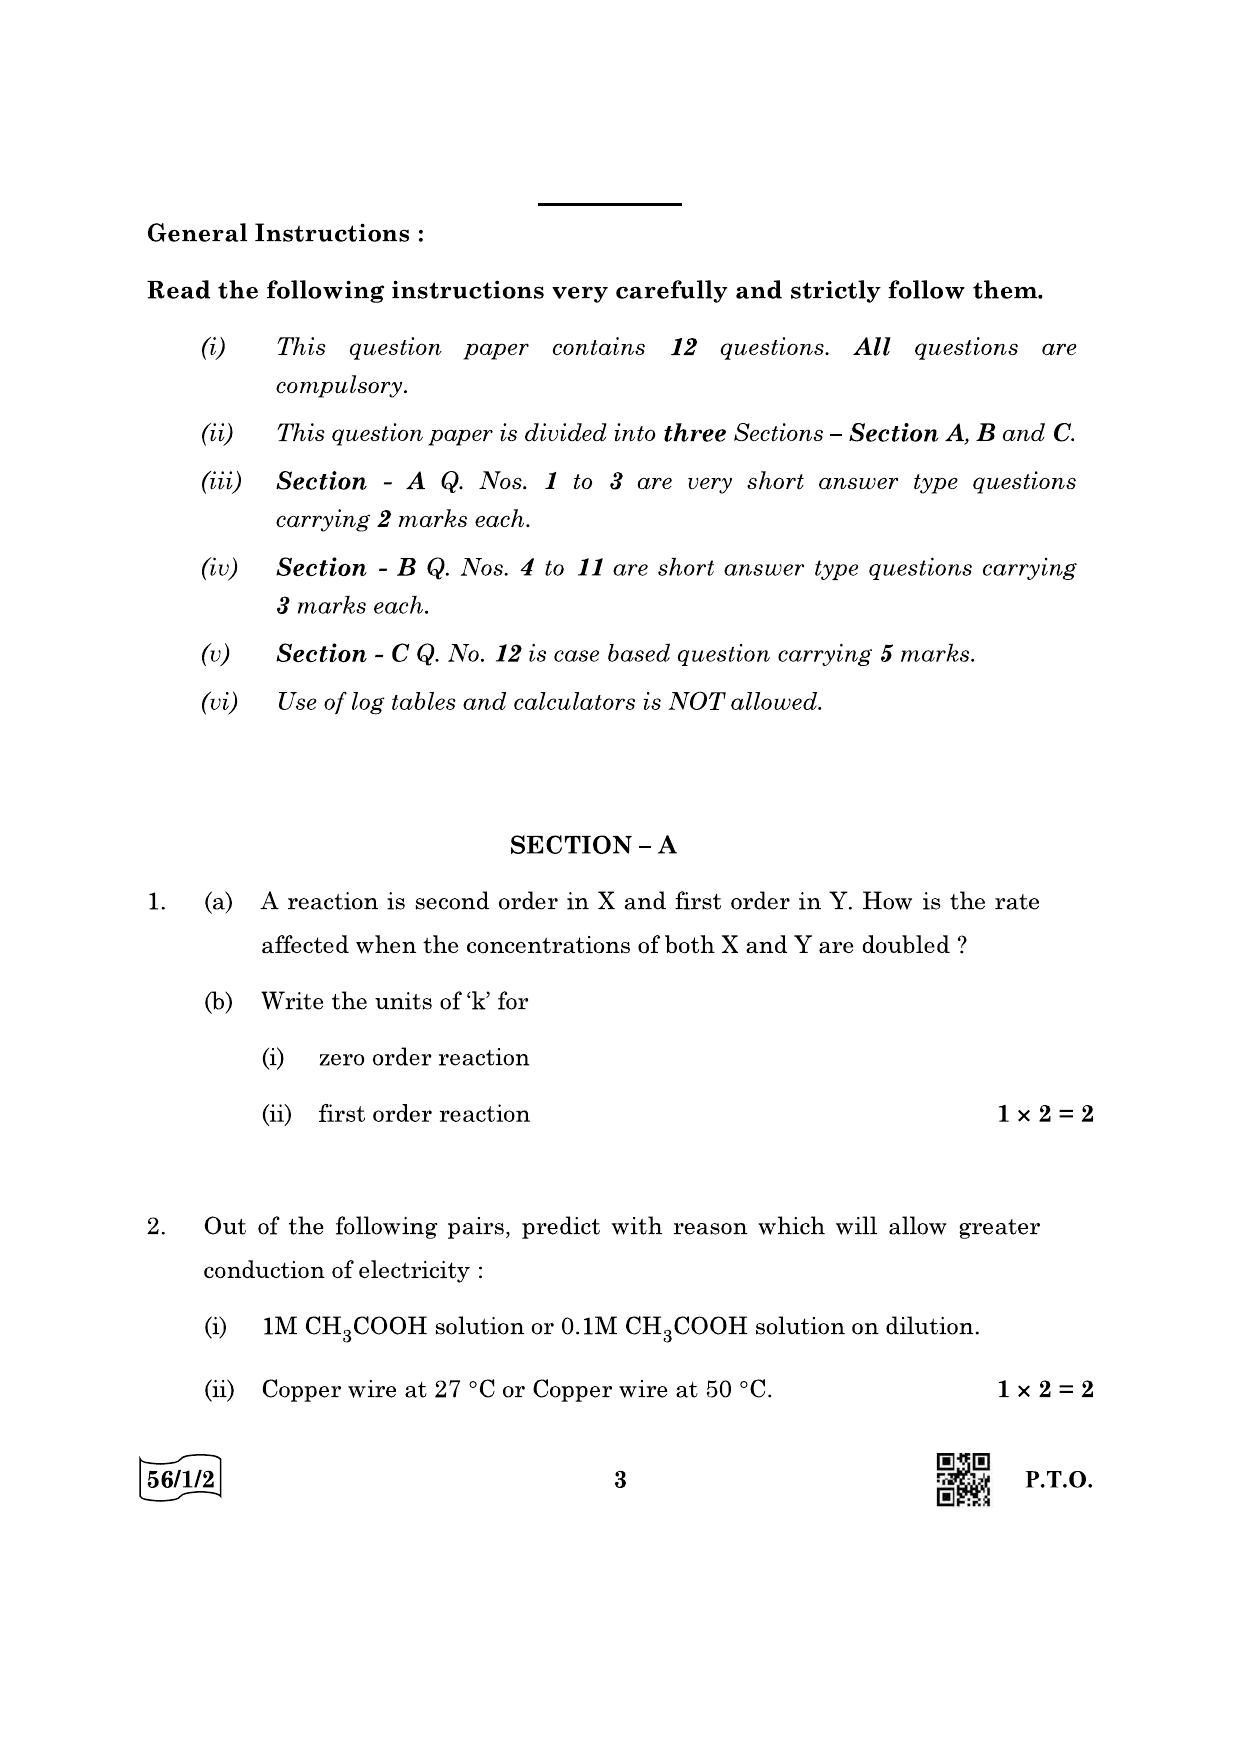 CBSE Class 12 56-1-2 Chemistry 2022 Question Paper - Page 3